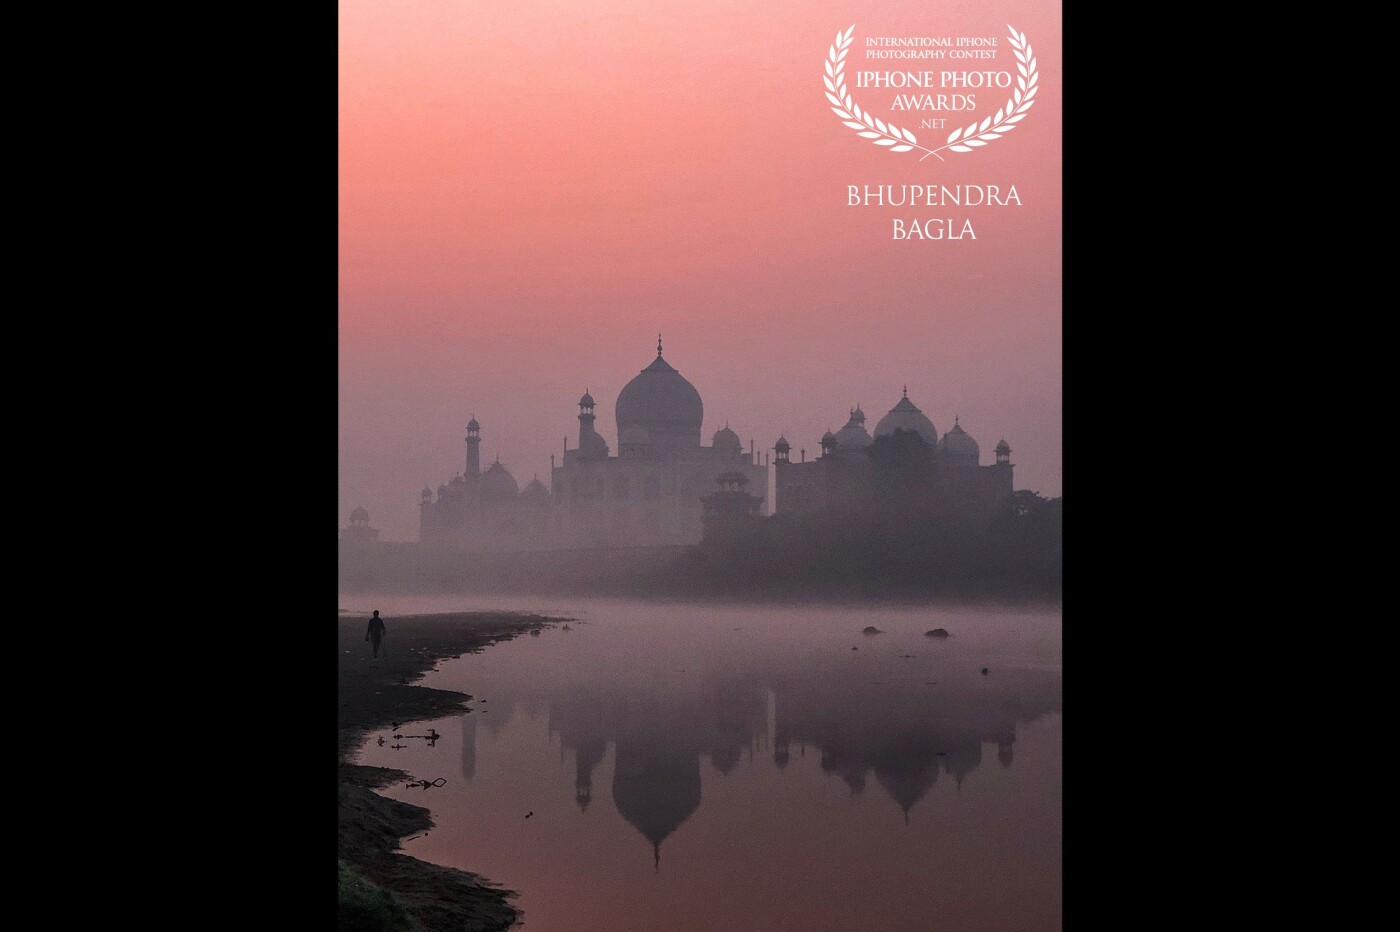 This picture was taken from this location called the Gyara Siddi early morning around 5:30 am just before the sunrise. The sky looked so pink and there were haze and fog around. The reflection of Taj Mahal in the Yamuna River looked breathtaking. This is quite a secret and undiscovered spot and there was a local villager standing all alone by himself and watching the view as well which made my frame quite interesting and I knew it’s worth capturing it. 